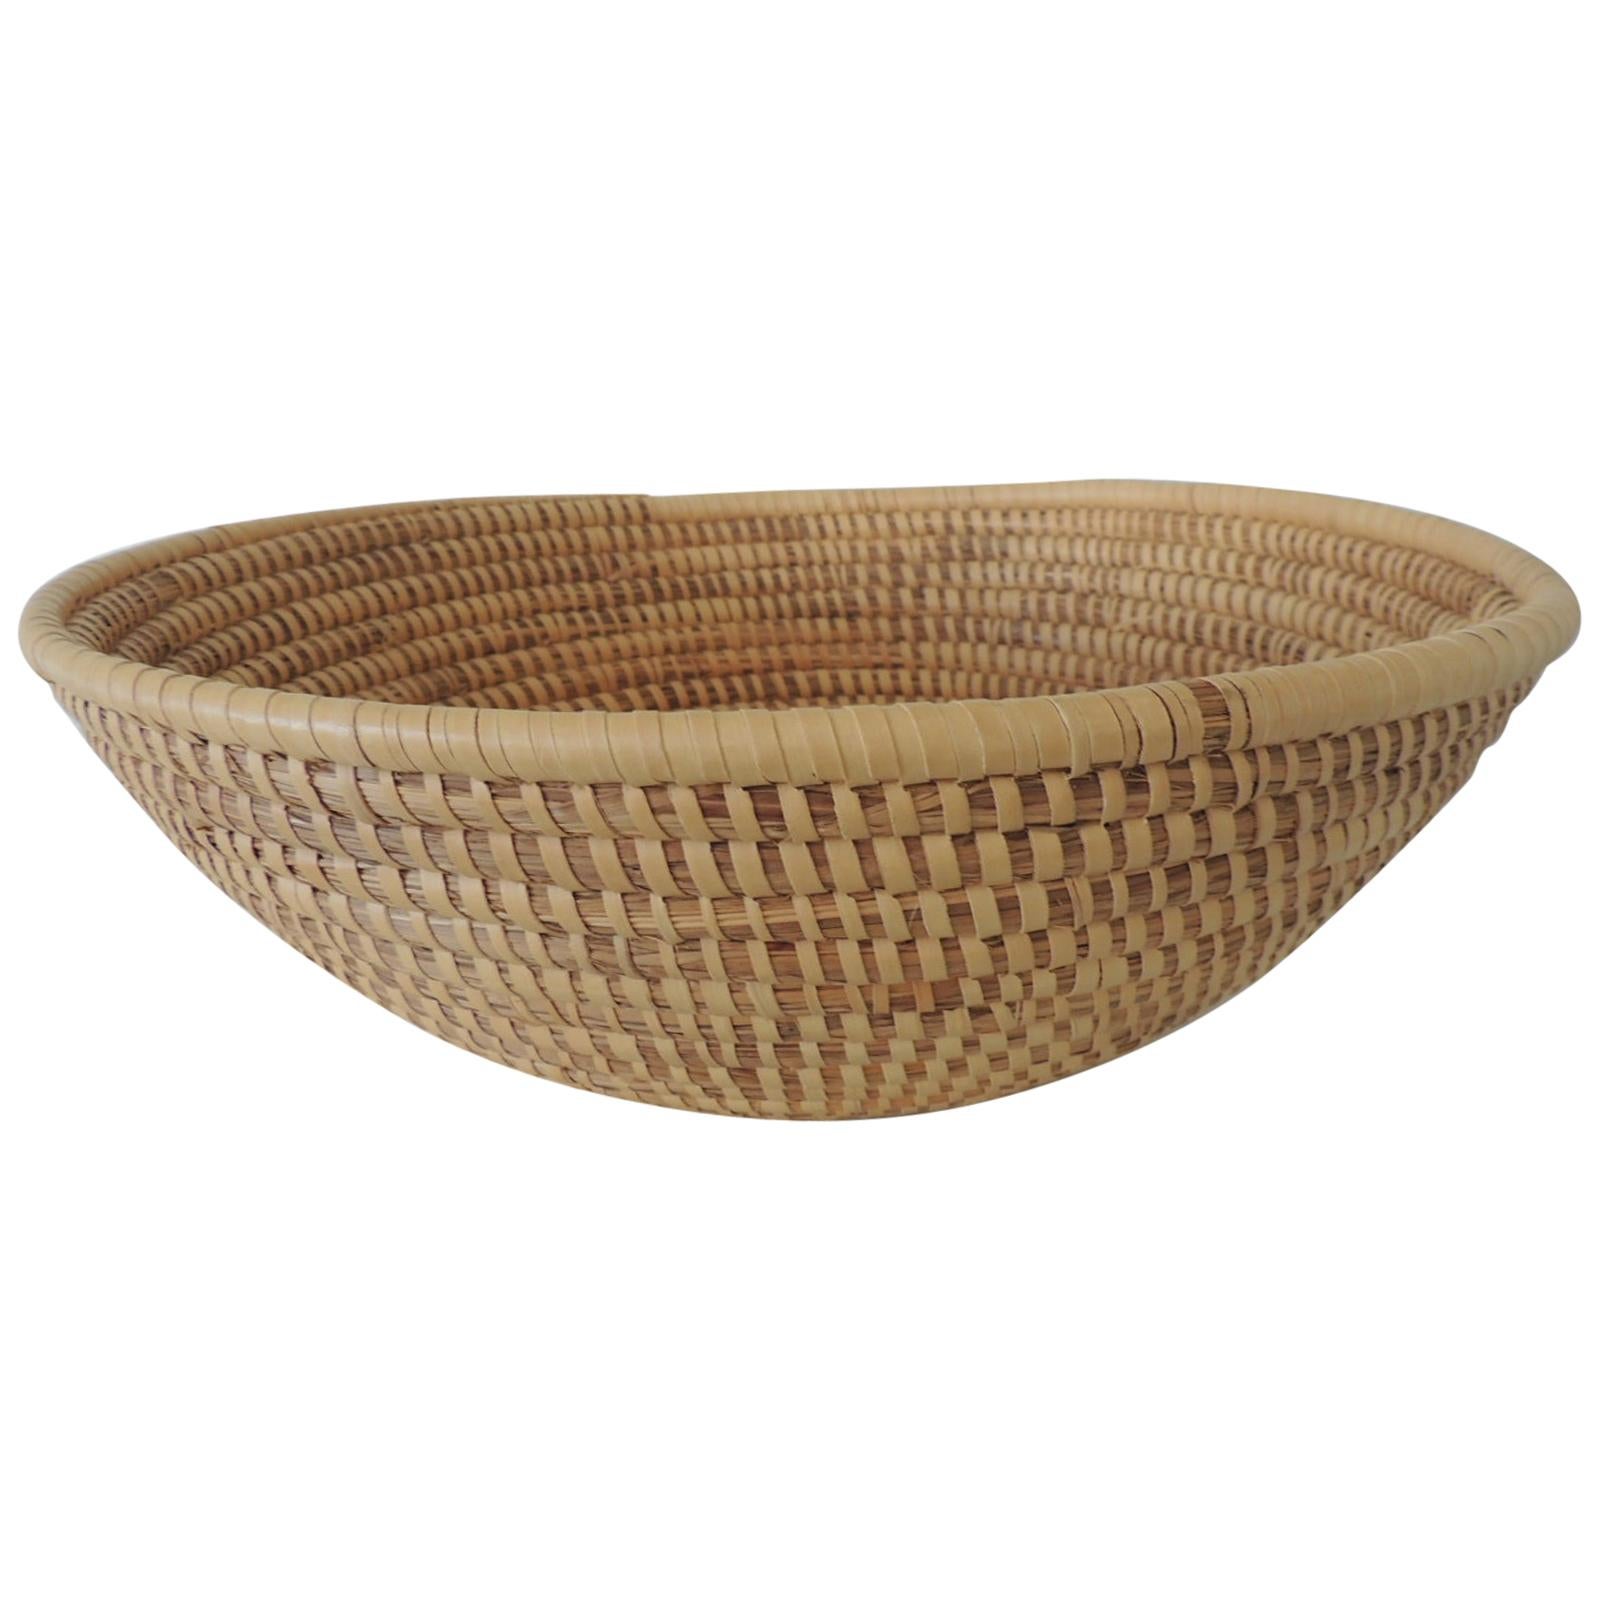 Large Round Woven Seagrass Decorative Basket